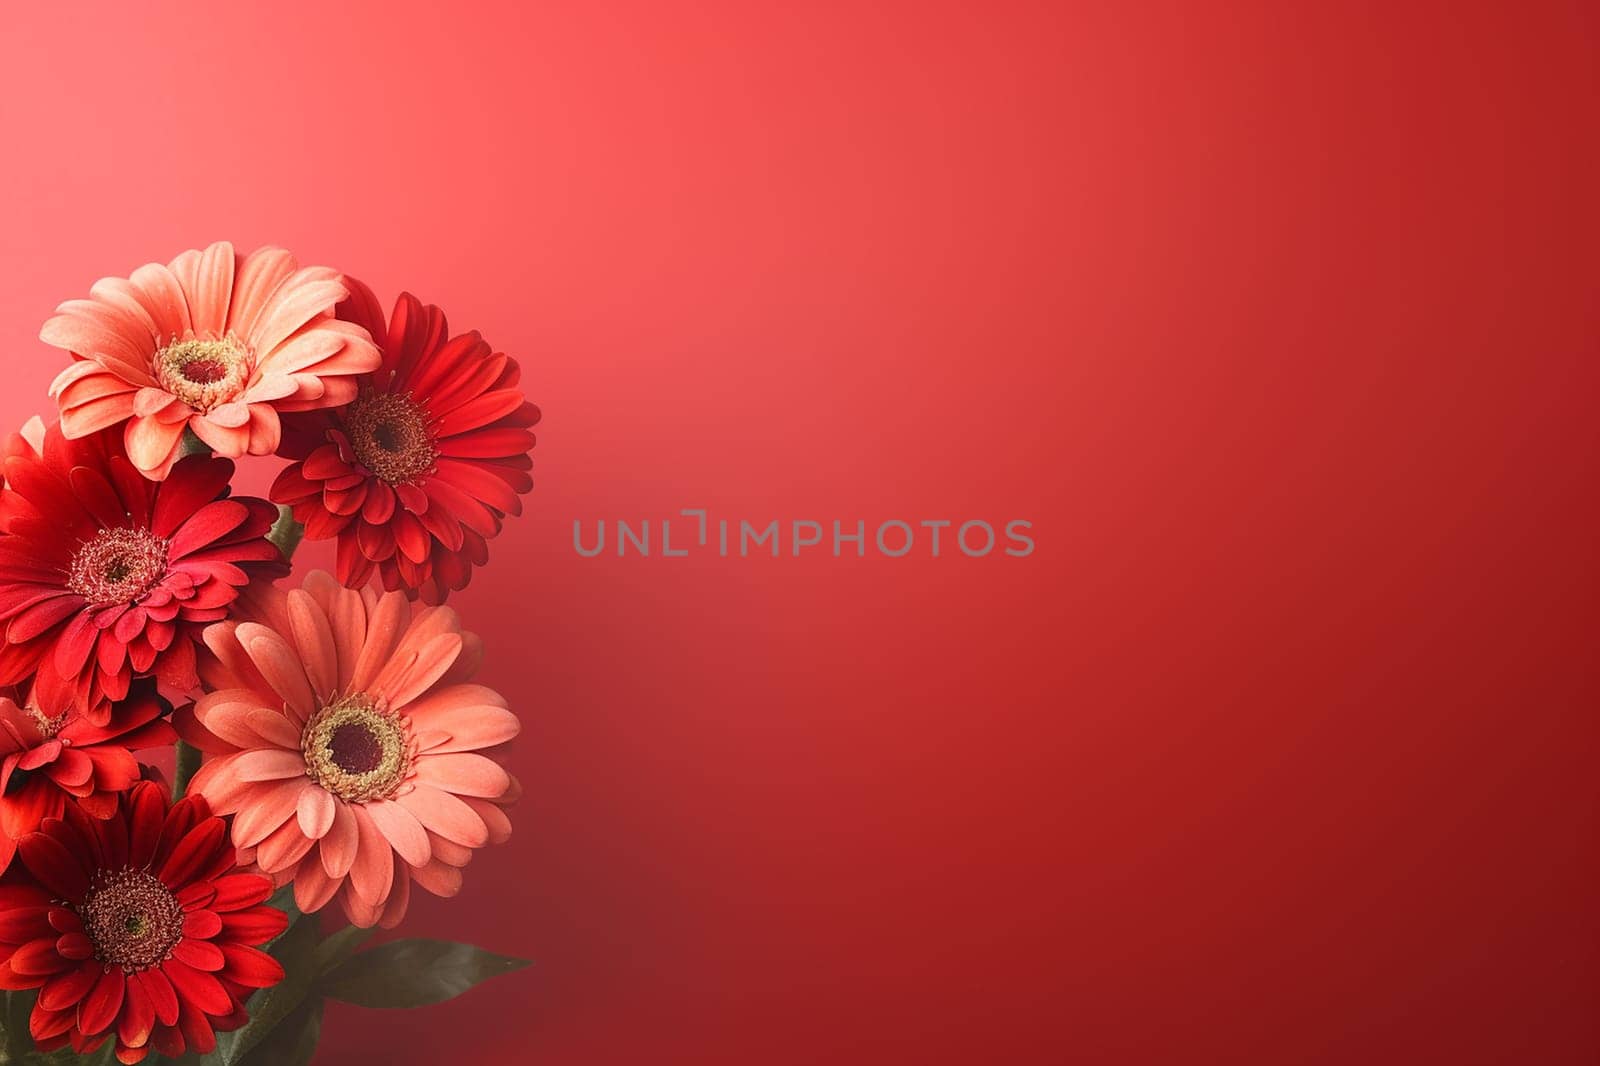 A bouquet of pink gerbera flowers against a red background.